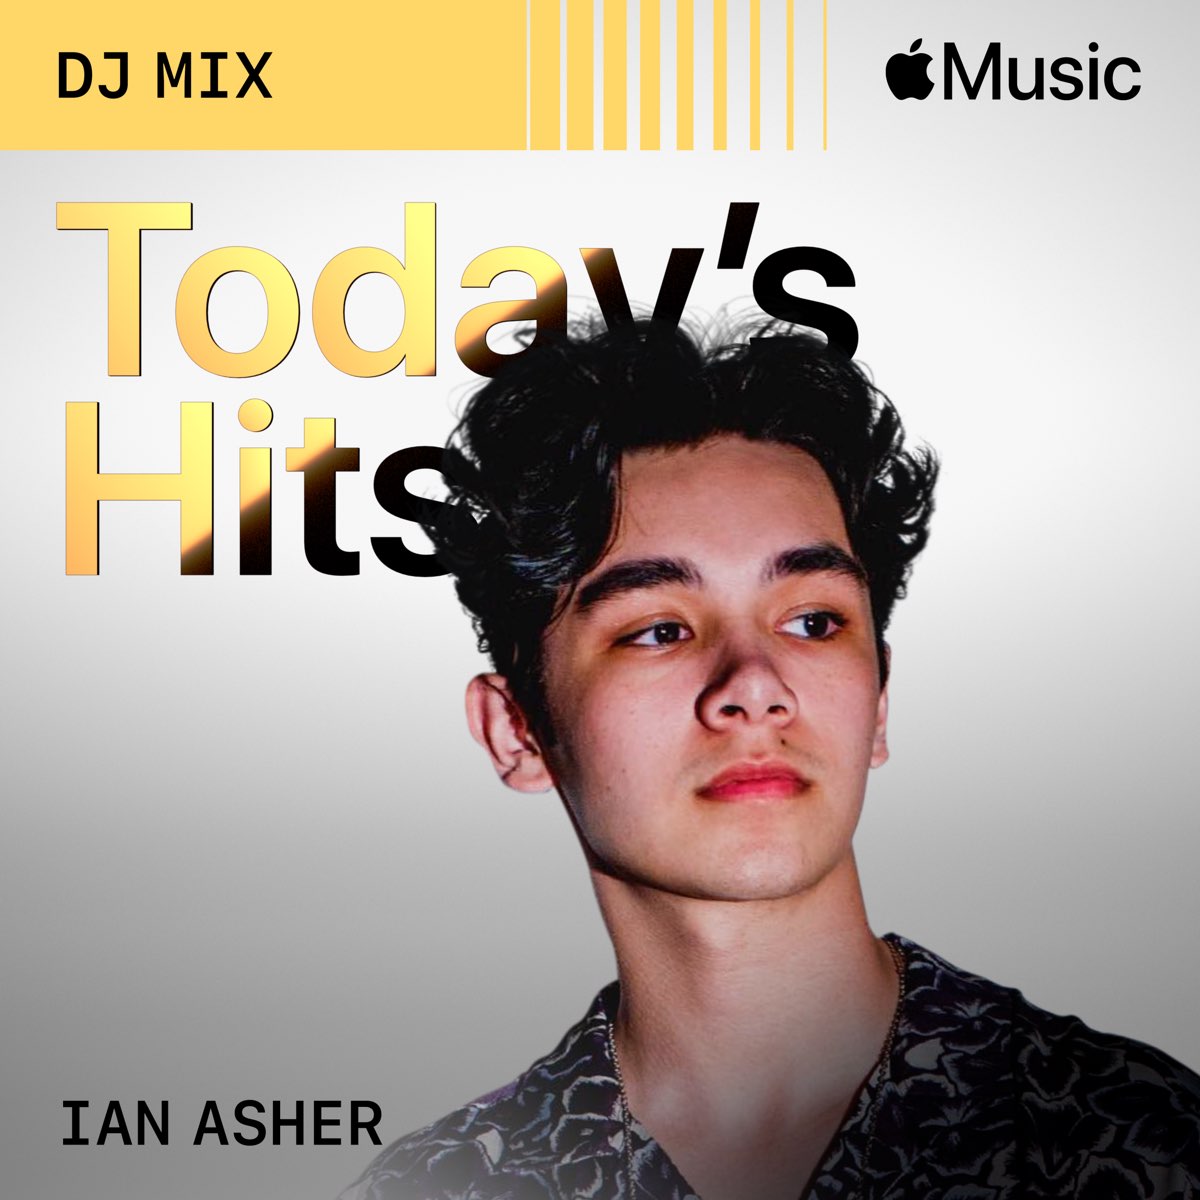 ‎Today’s Hits September 2022 (DJ Mix) by Ian Asher on Apple Music